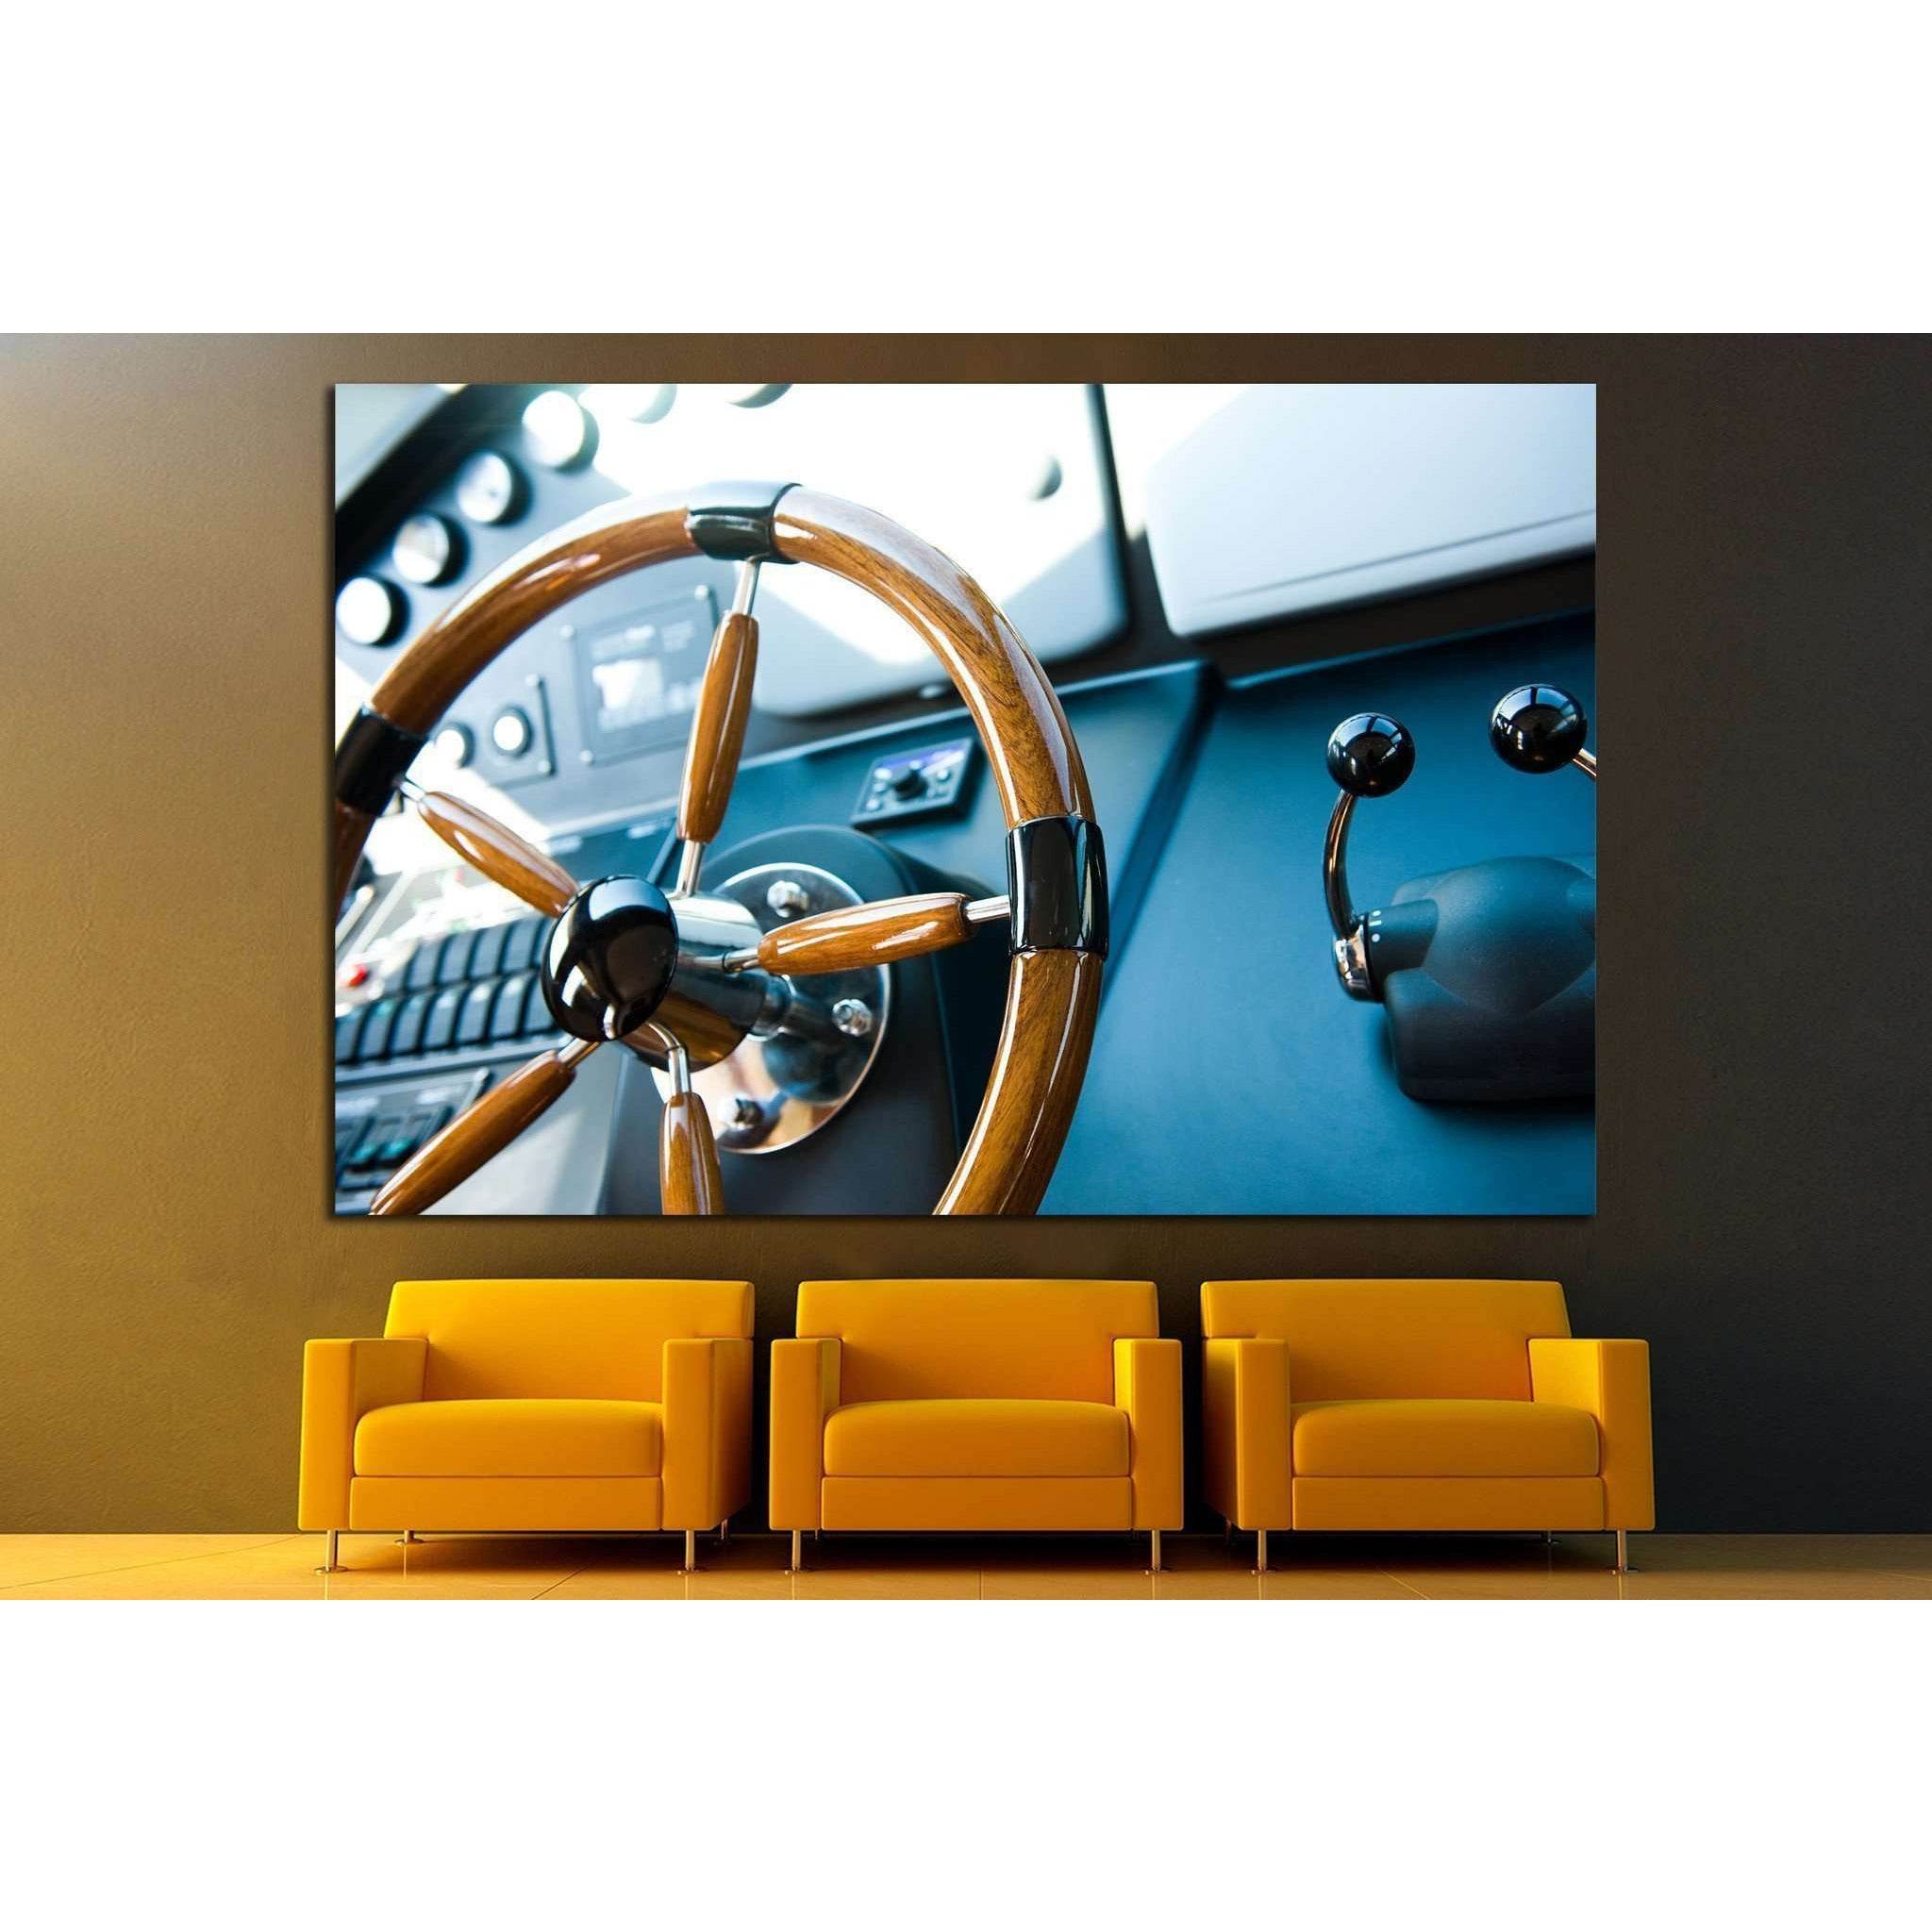 Steering wheel on a luxury yacht №1410 Ready to Hang Canvas Print